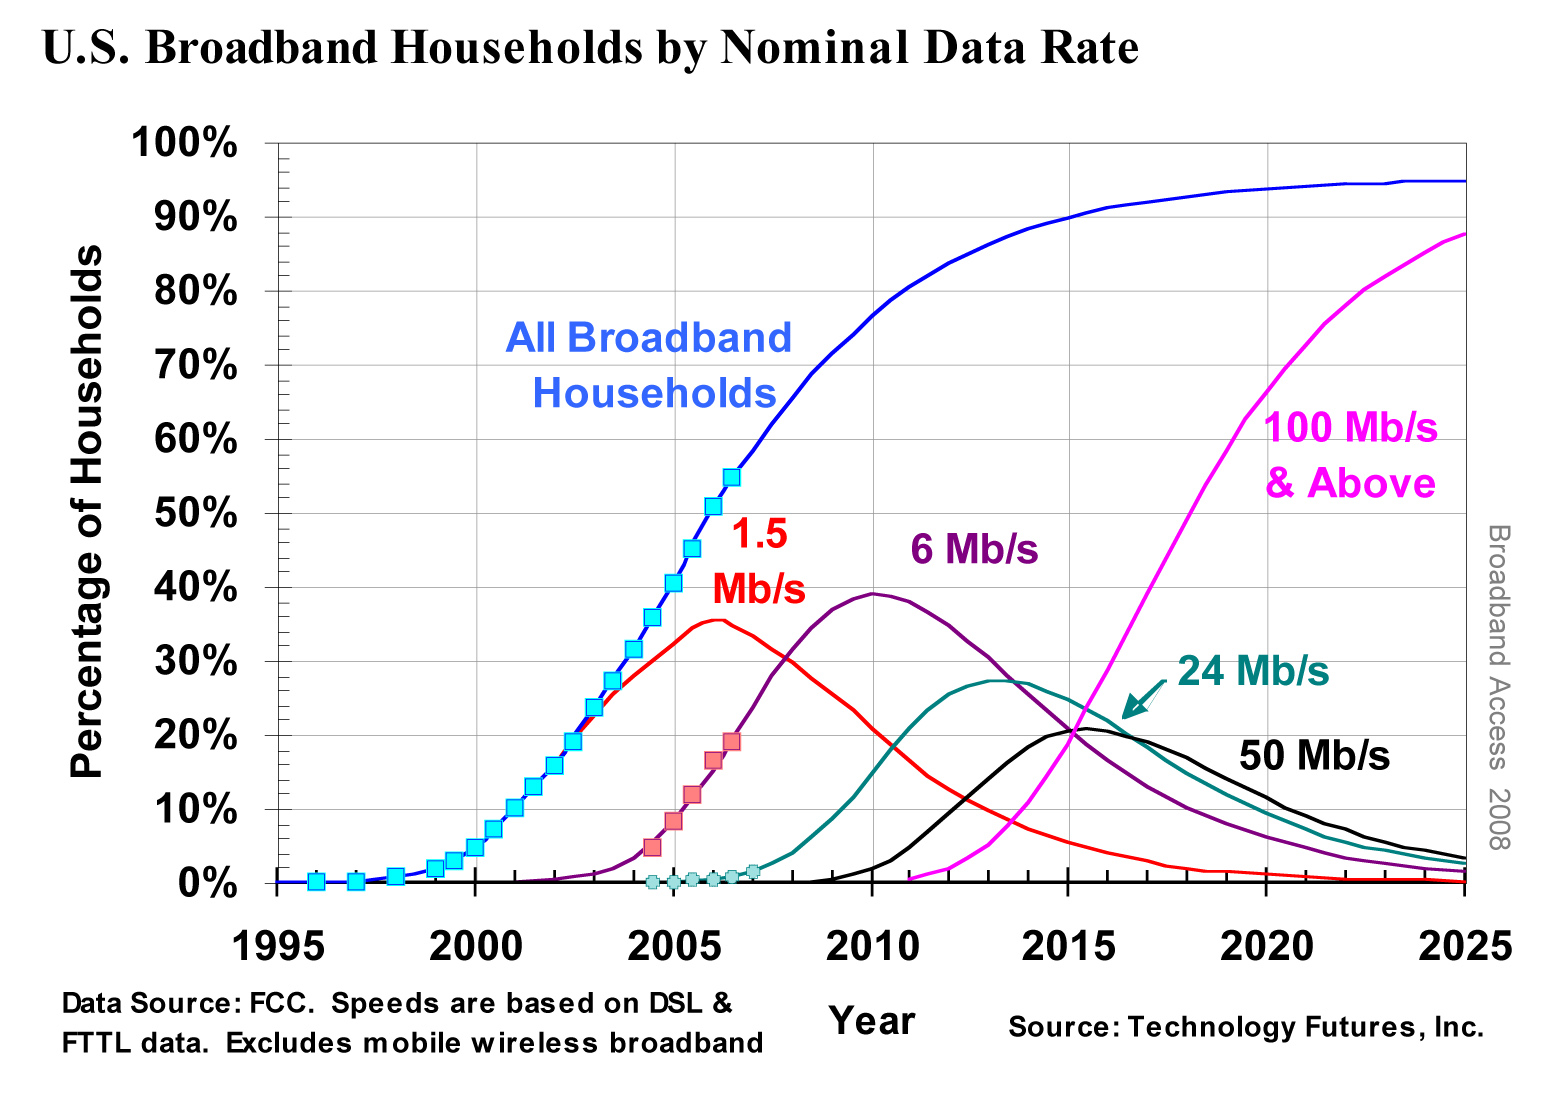 U.S. Broadband Households by Nominal Data Rate Featured Graph